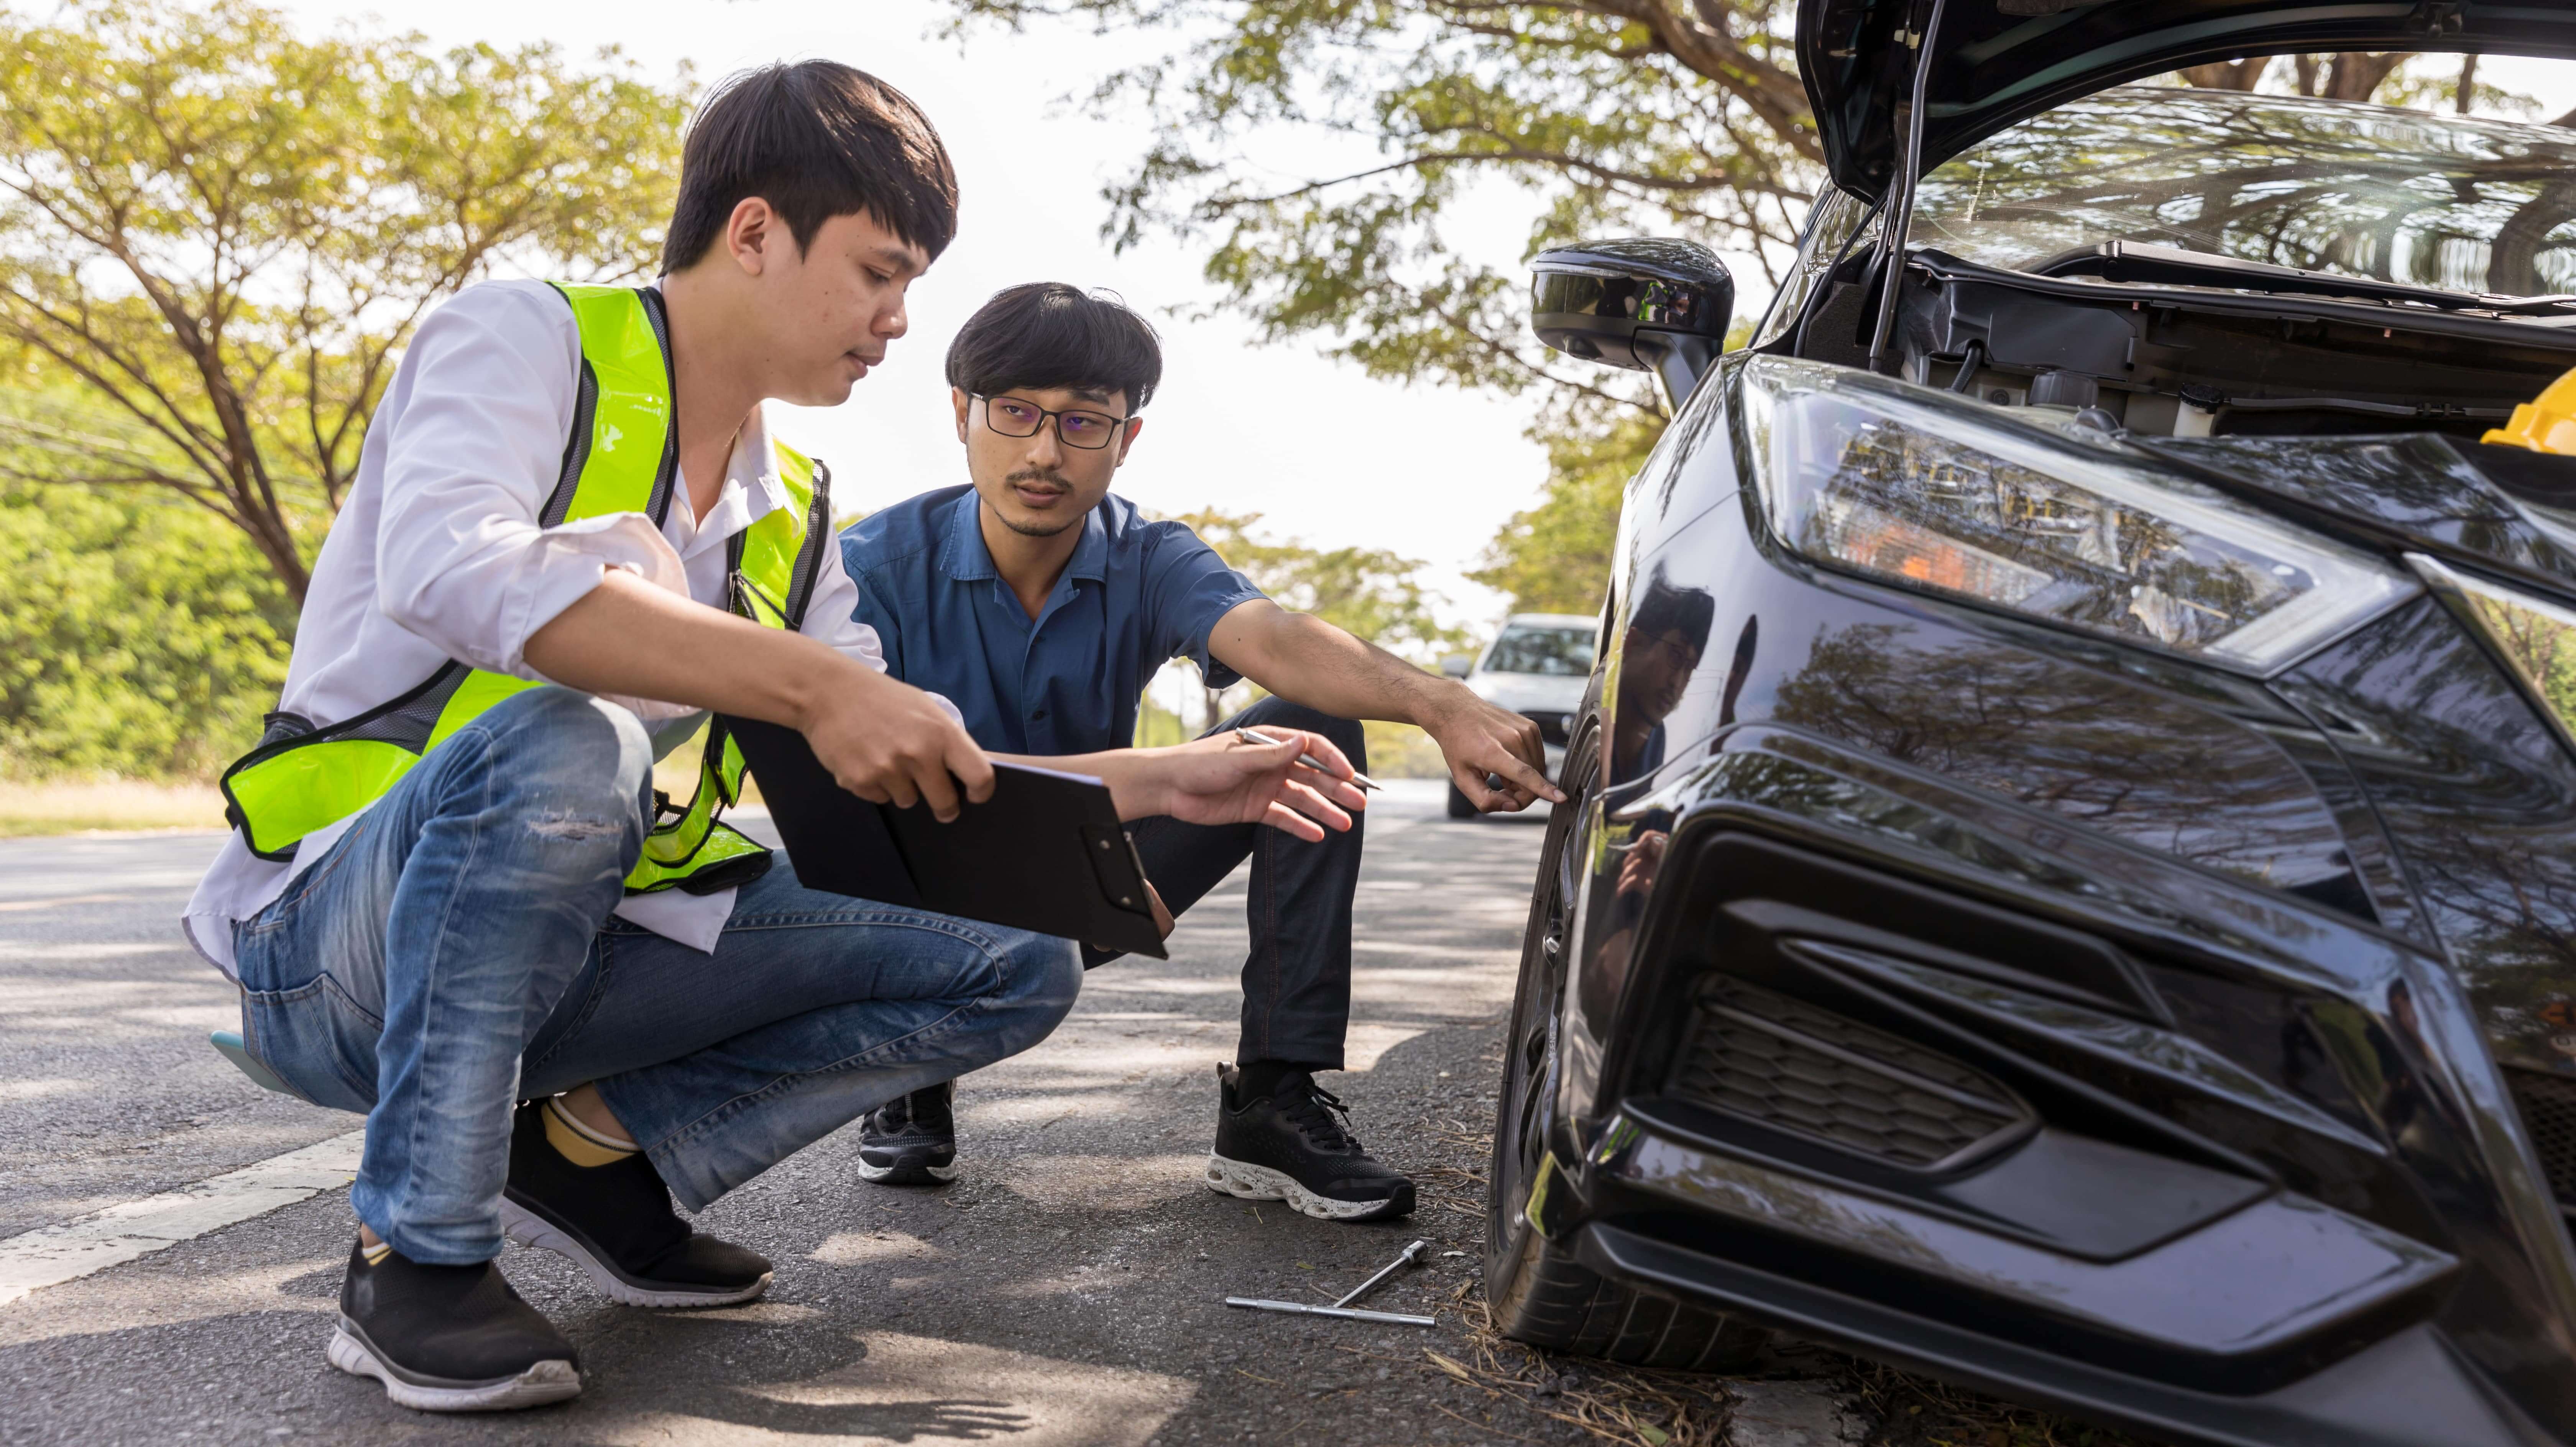 Featured image for “Emergency Roadside Assistance for Cars: How to Get Help Fast”